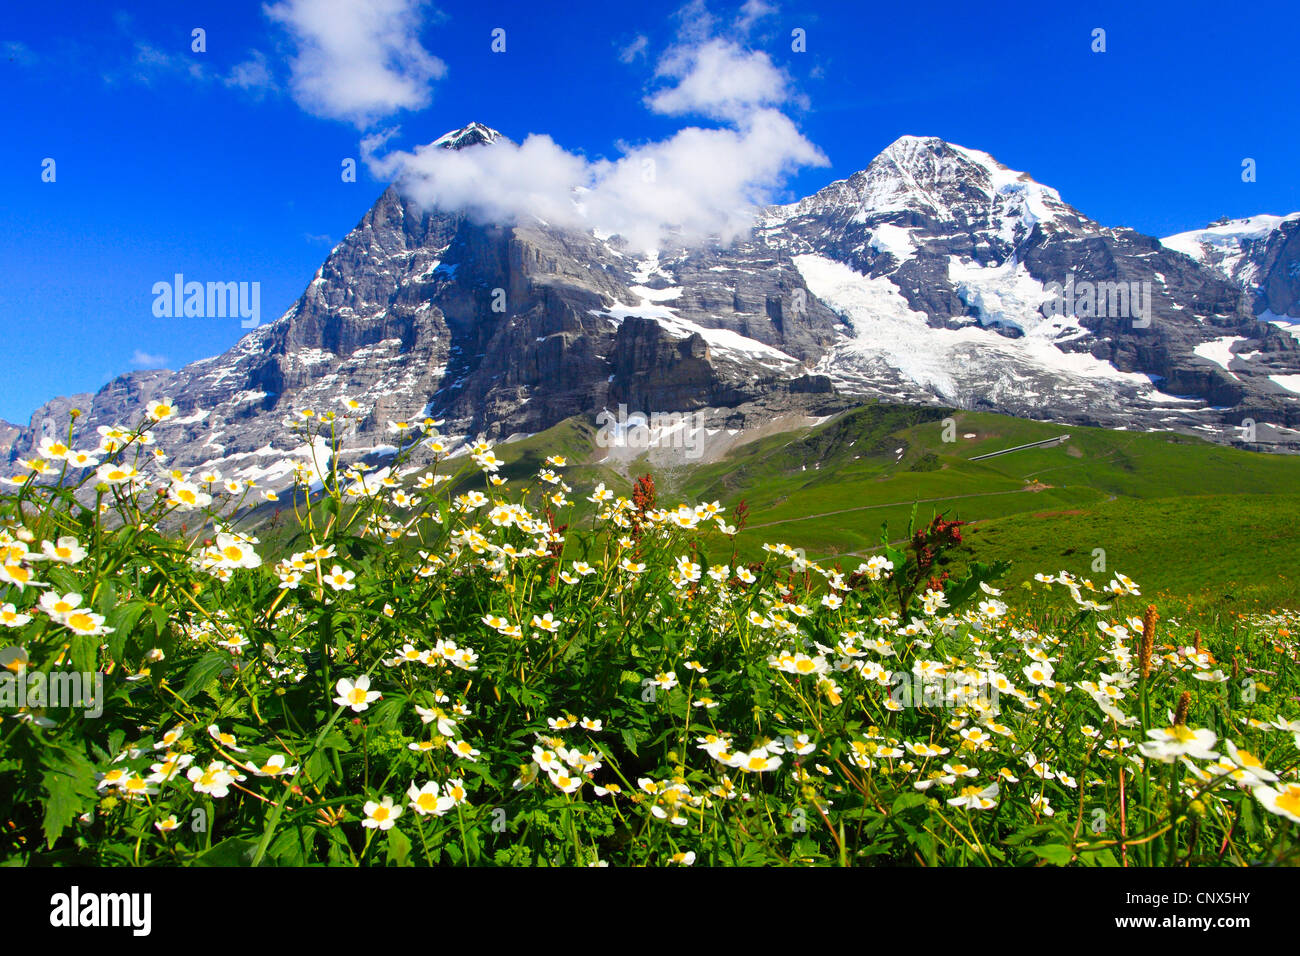 Aconite-leaf buttercup (Ranunculus aconitifolius), blooming in front of Eiger and Moench, Switzerland, Bernese Oberland Stock Photo